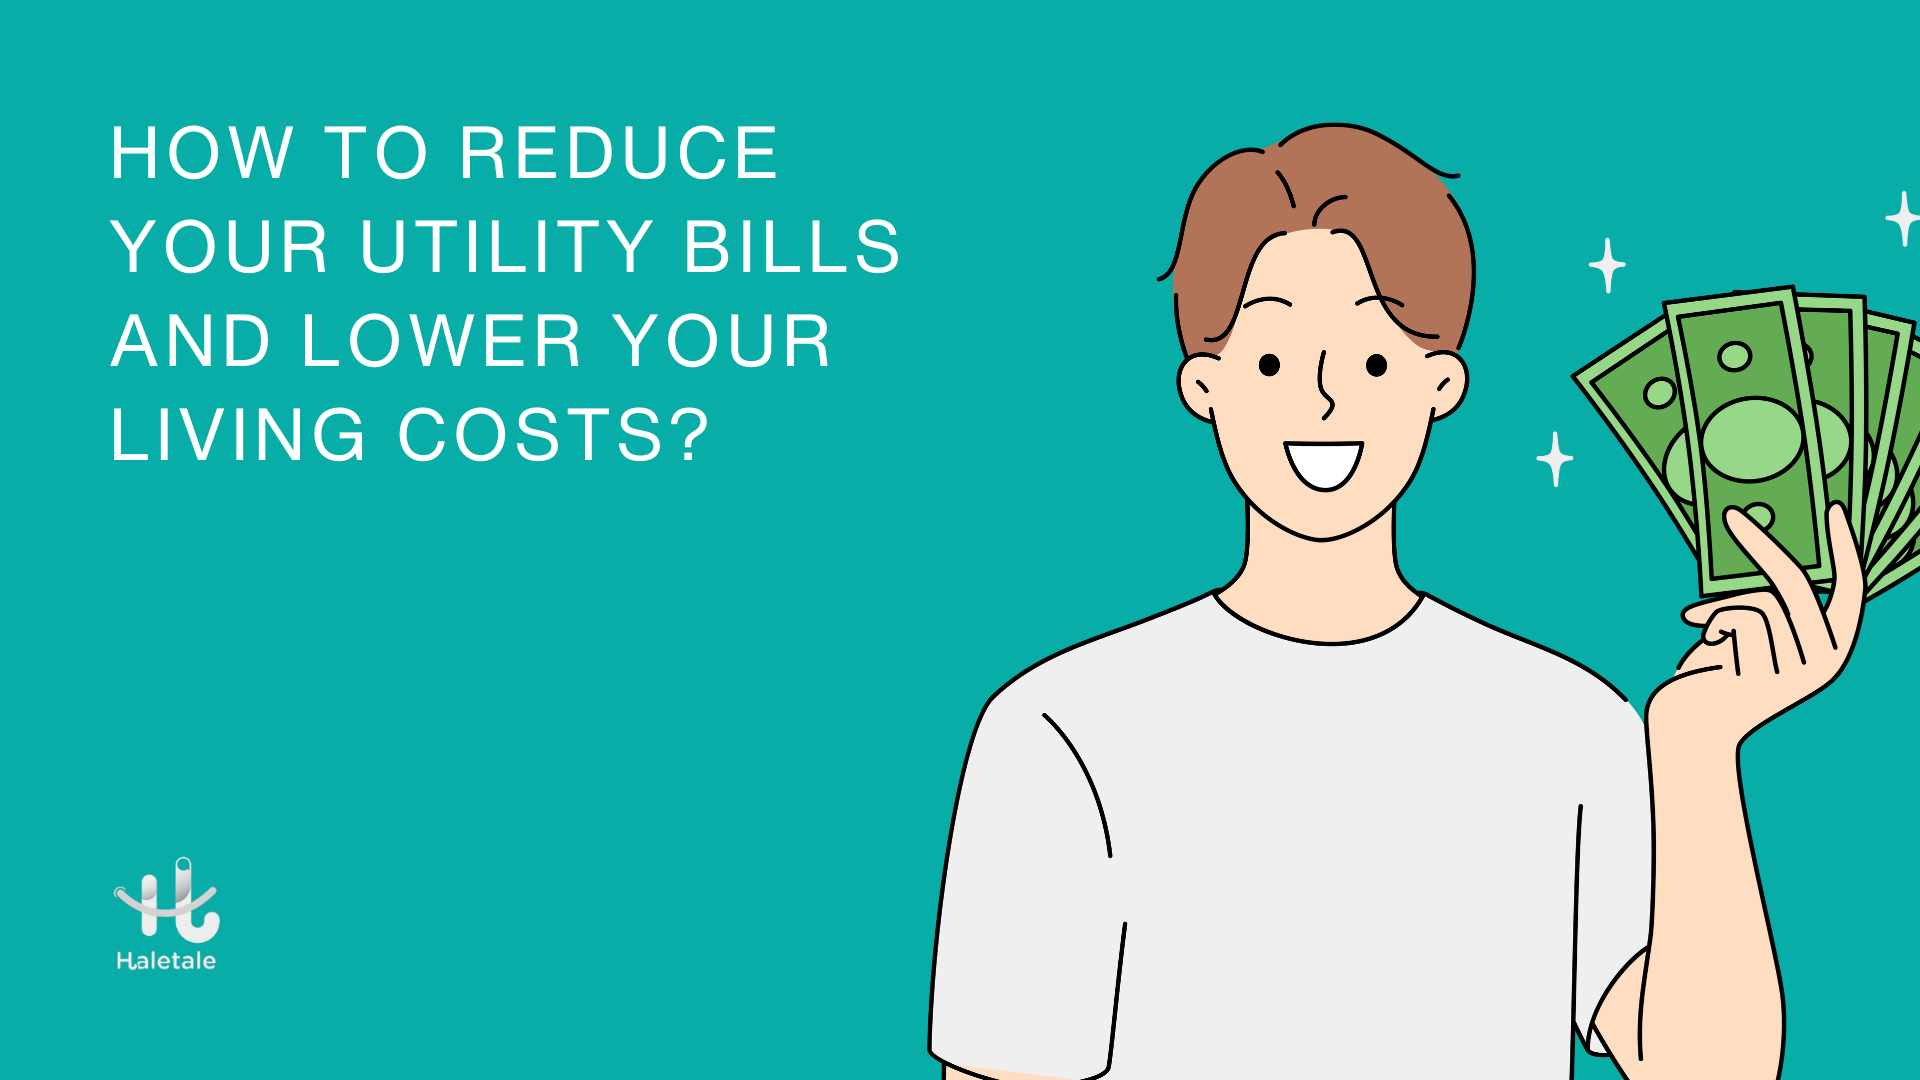 How To Reduce Your Utility Bills and Lower Your Living Costs